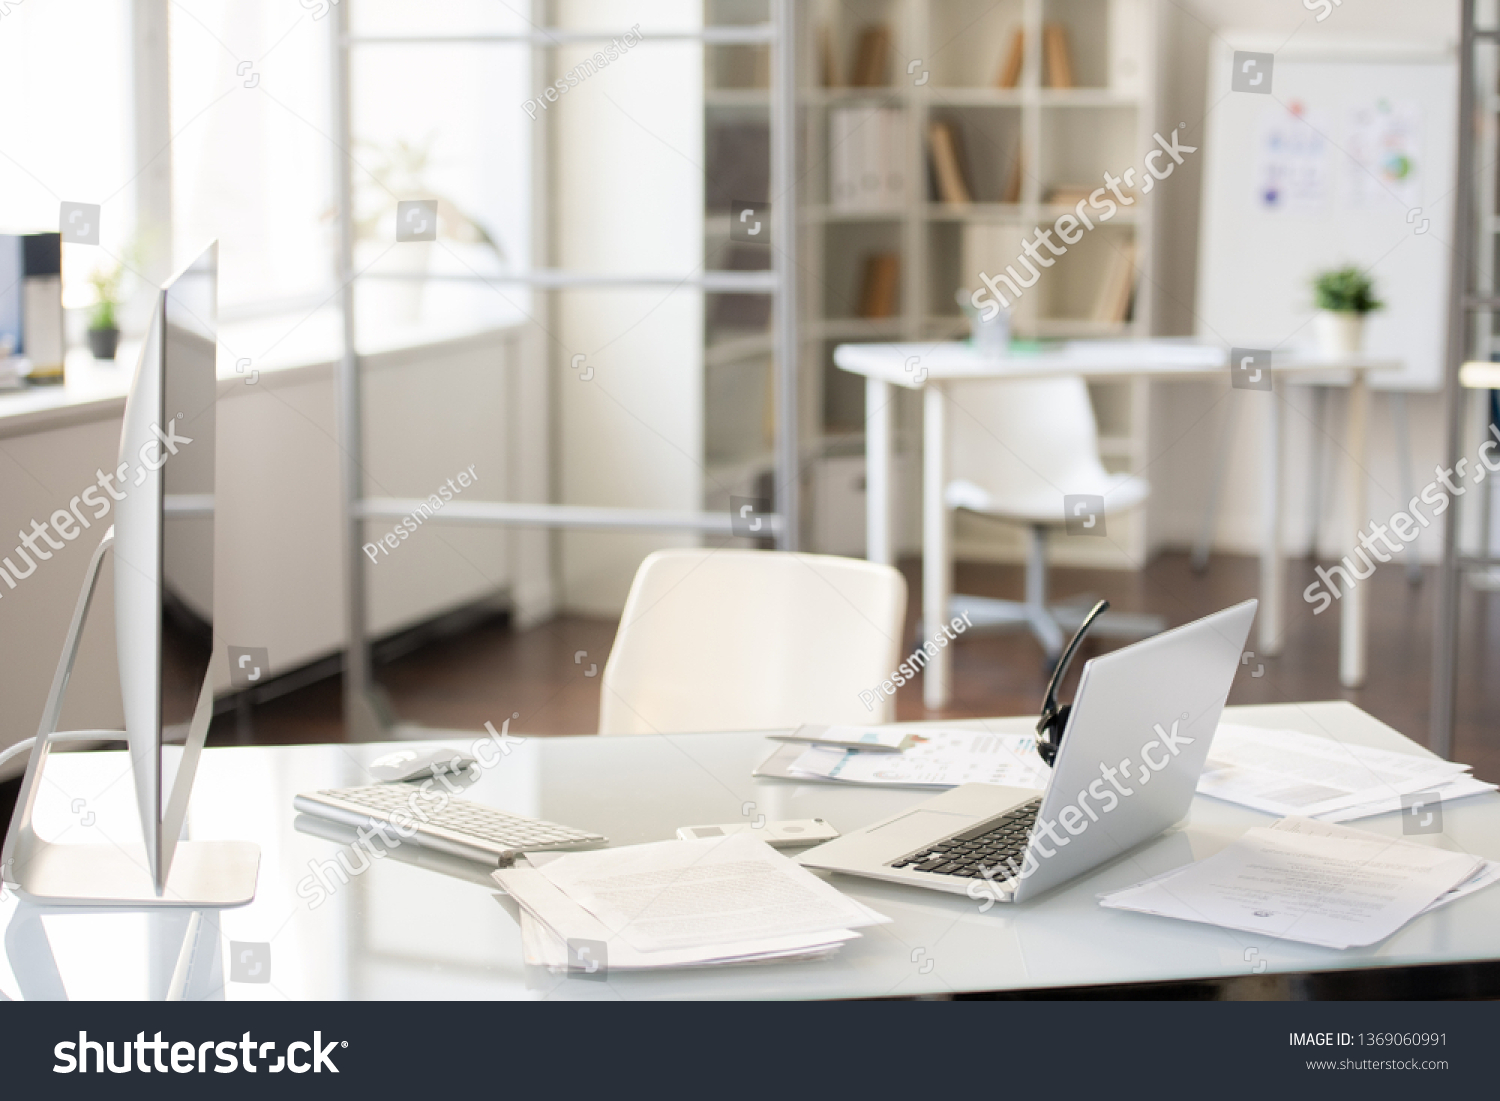 Office Desk Two Computers On Table Stock Photo Edit Now 1369060991